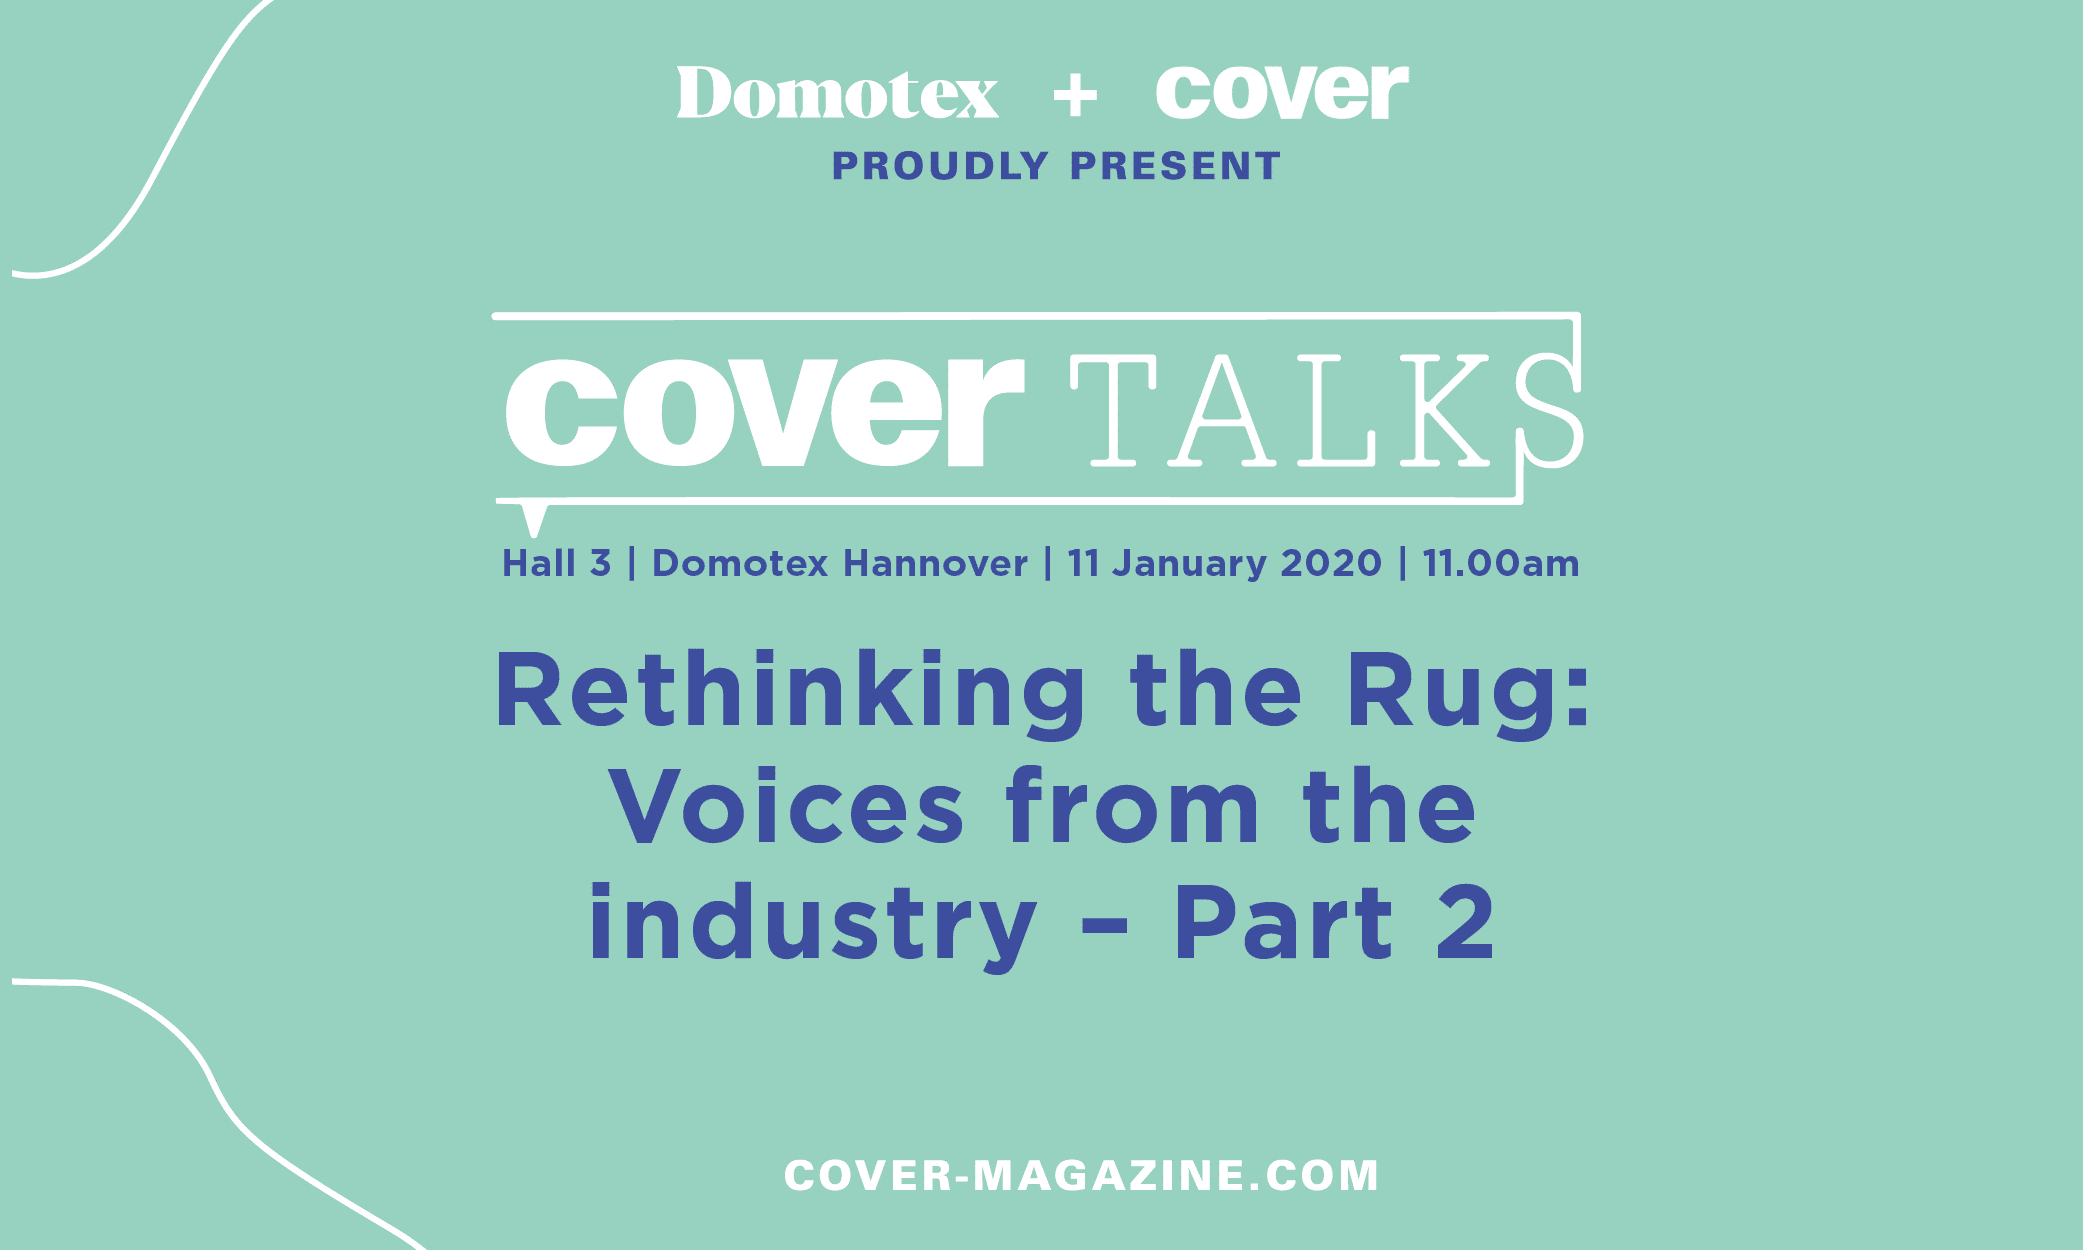 Rethinking the Rug: Voices from the industry — Part 2, Saturday 11 January, 11.00am